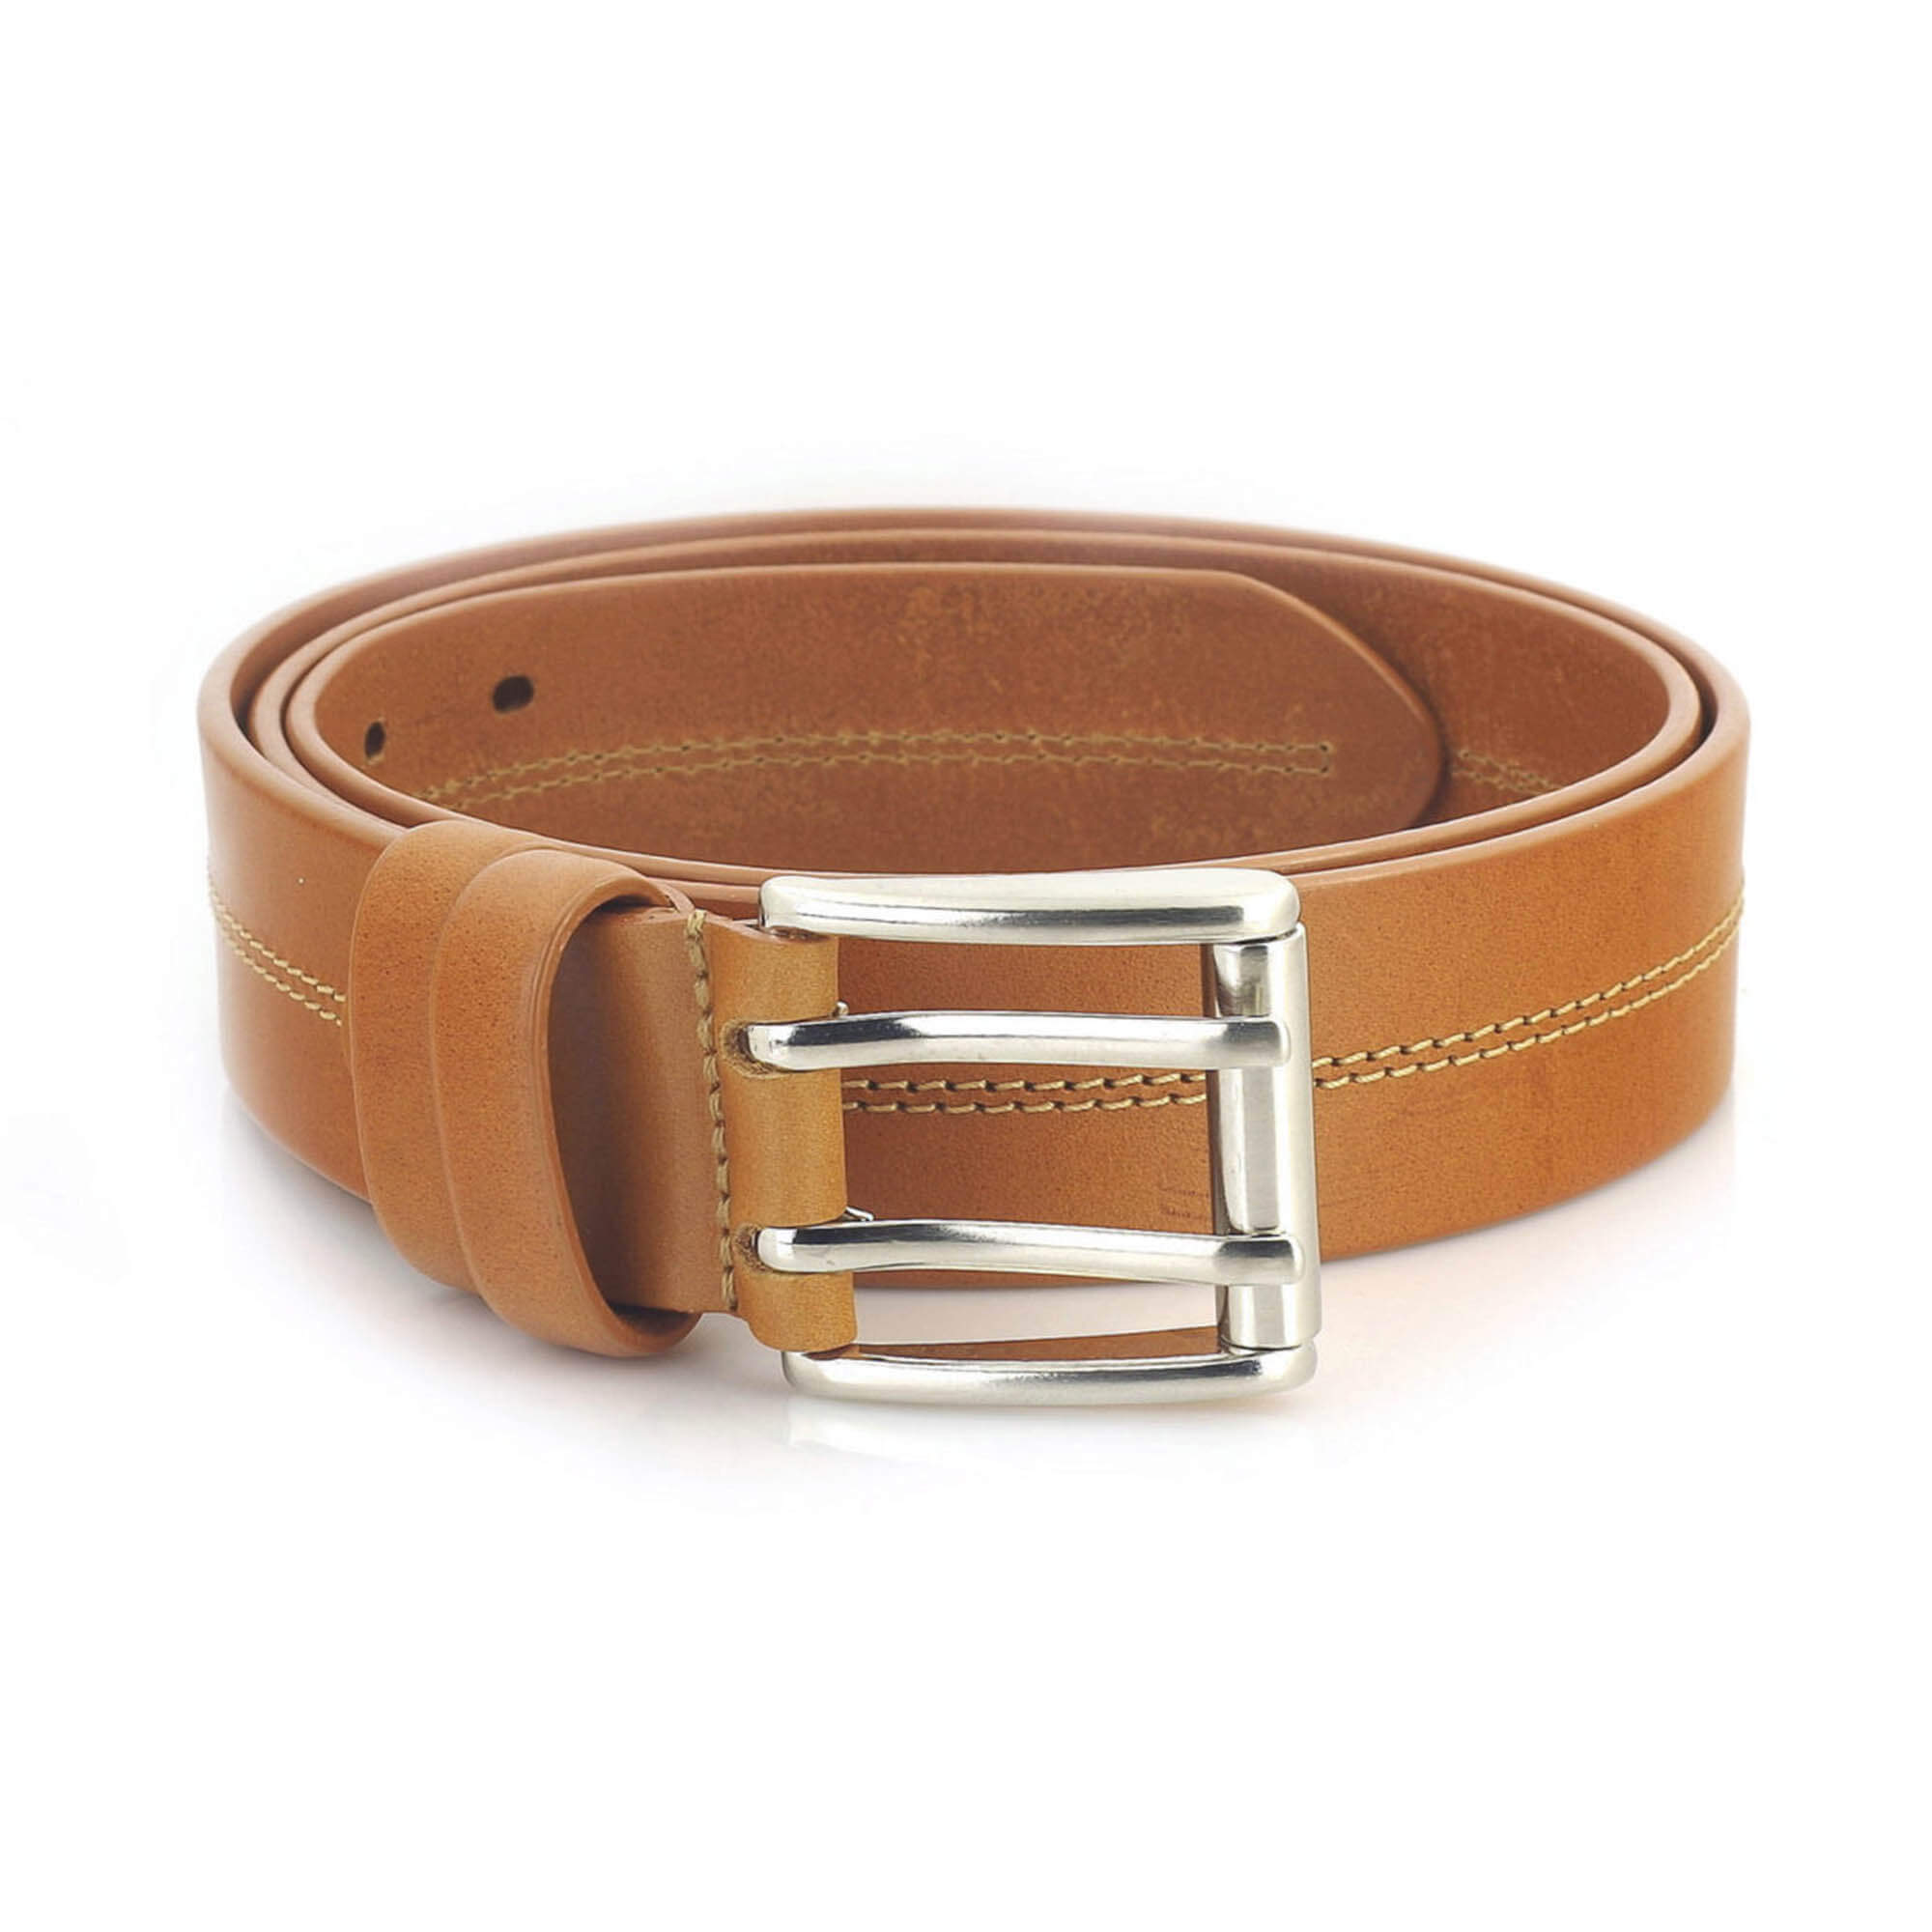 Buy Light Brown Two Hole Belt For Jeans - Double Prong Heavy